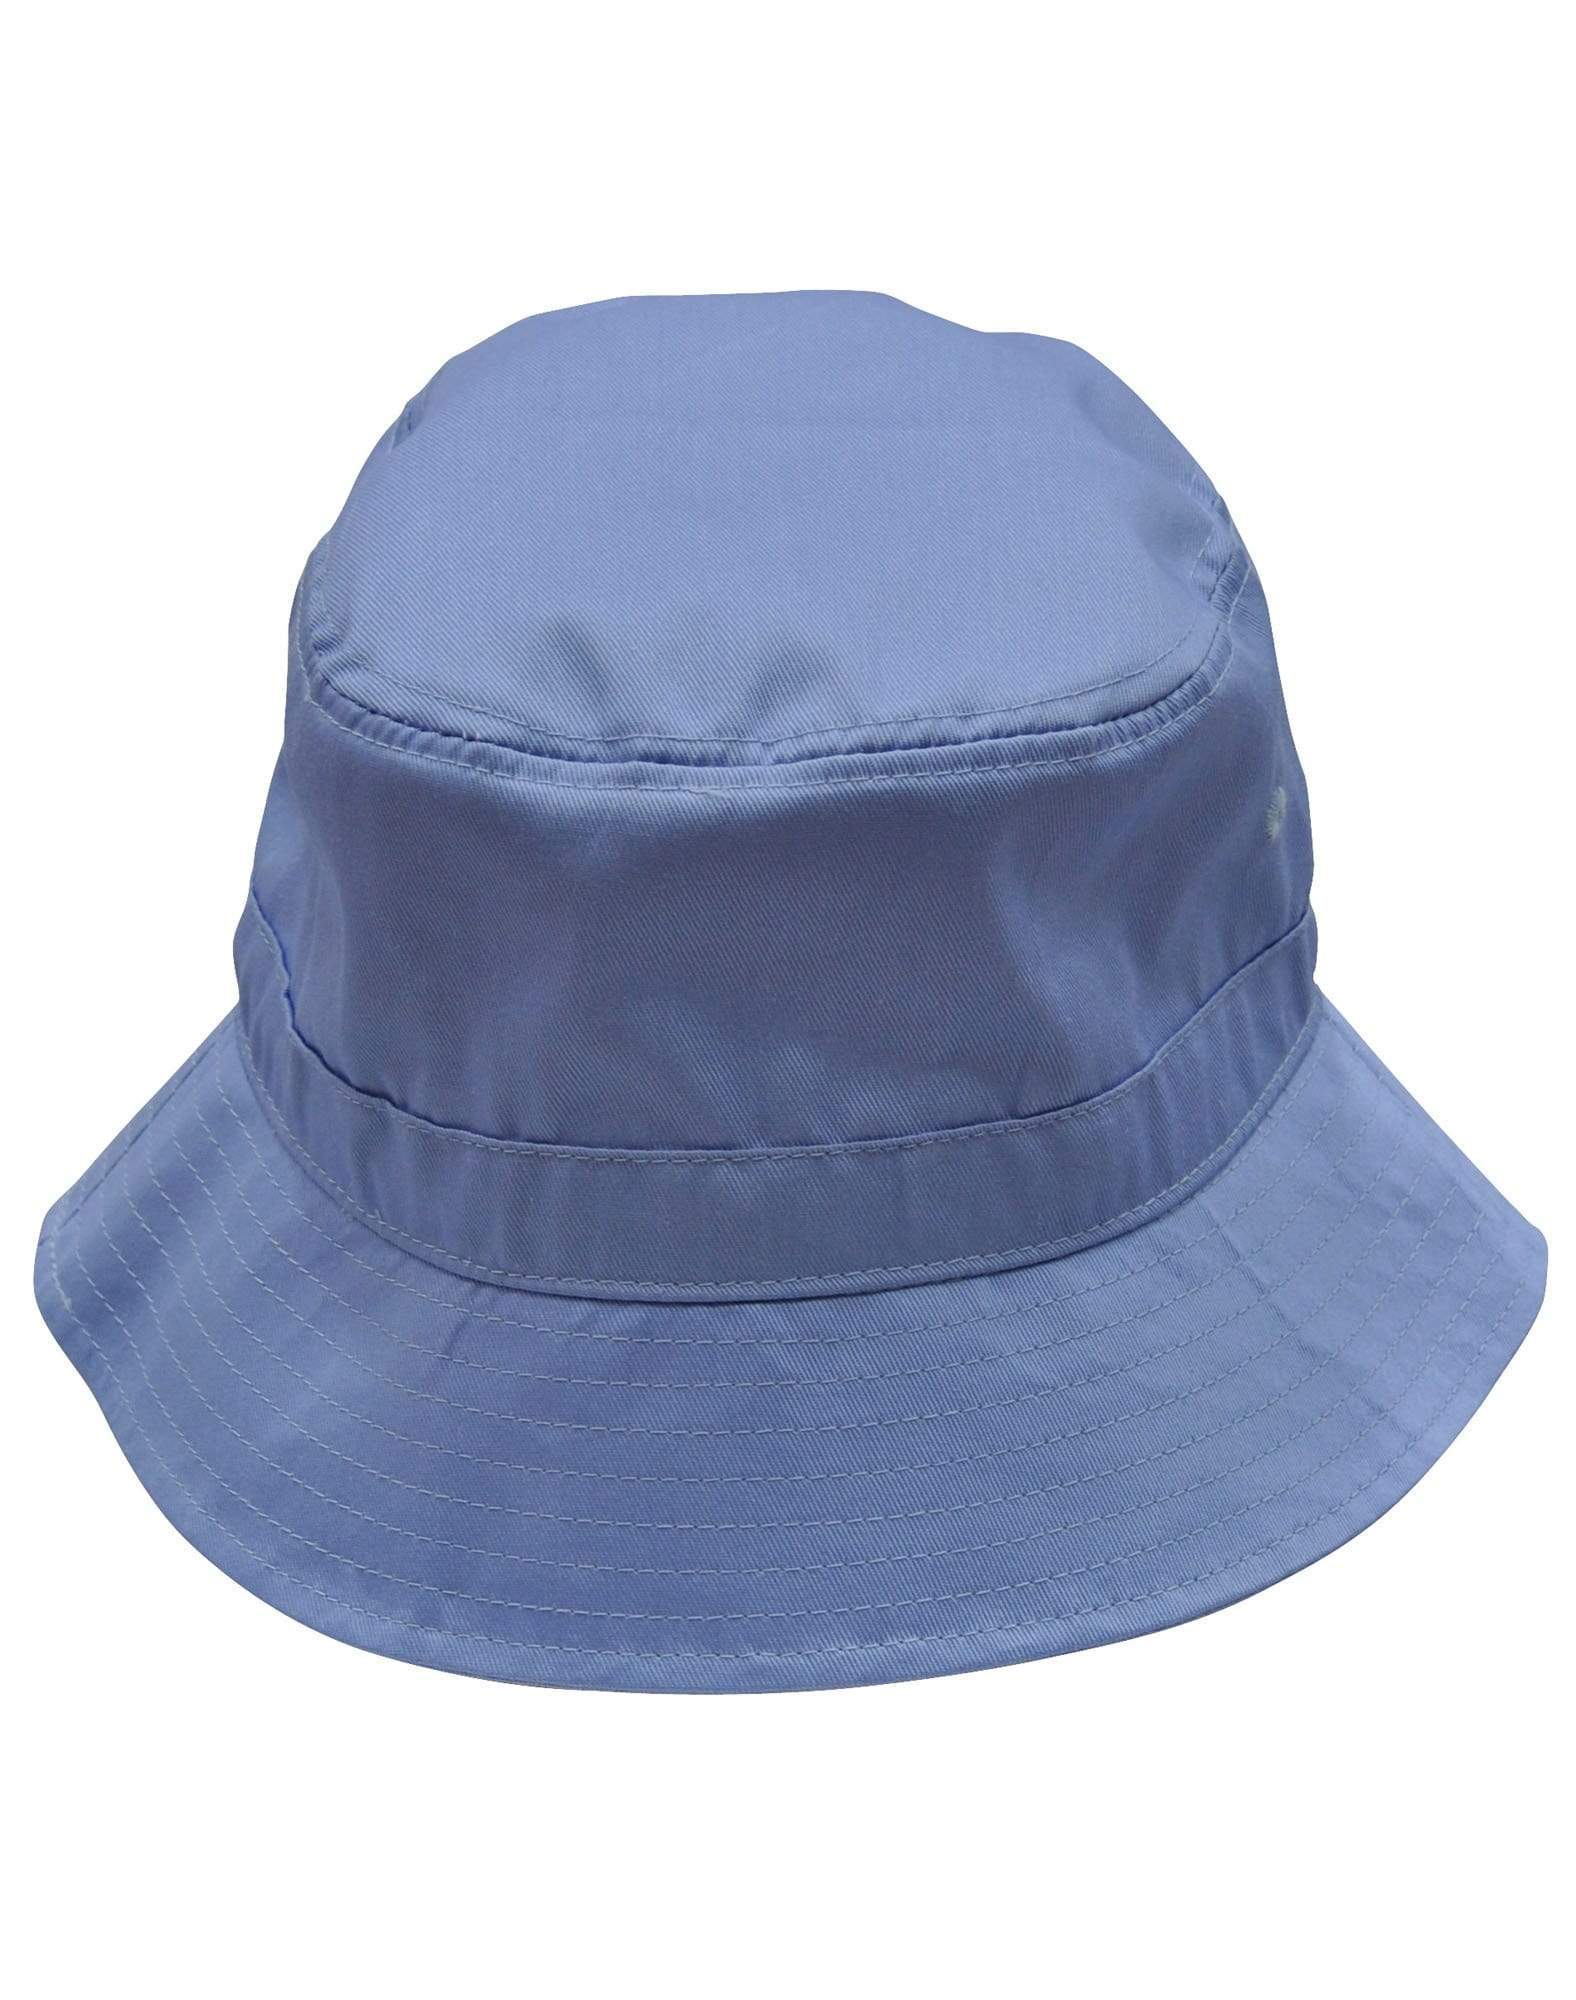 Bucket Hat With Toggle H1034 Active Wear Winning Spirit Skyblue S/M 